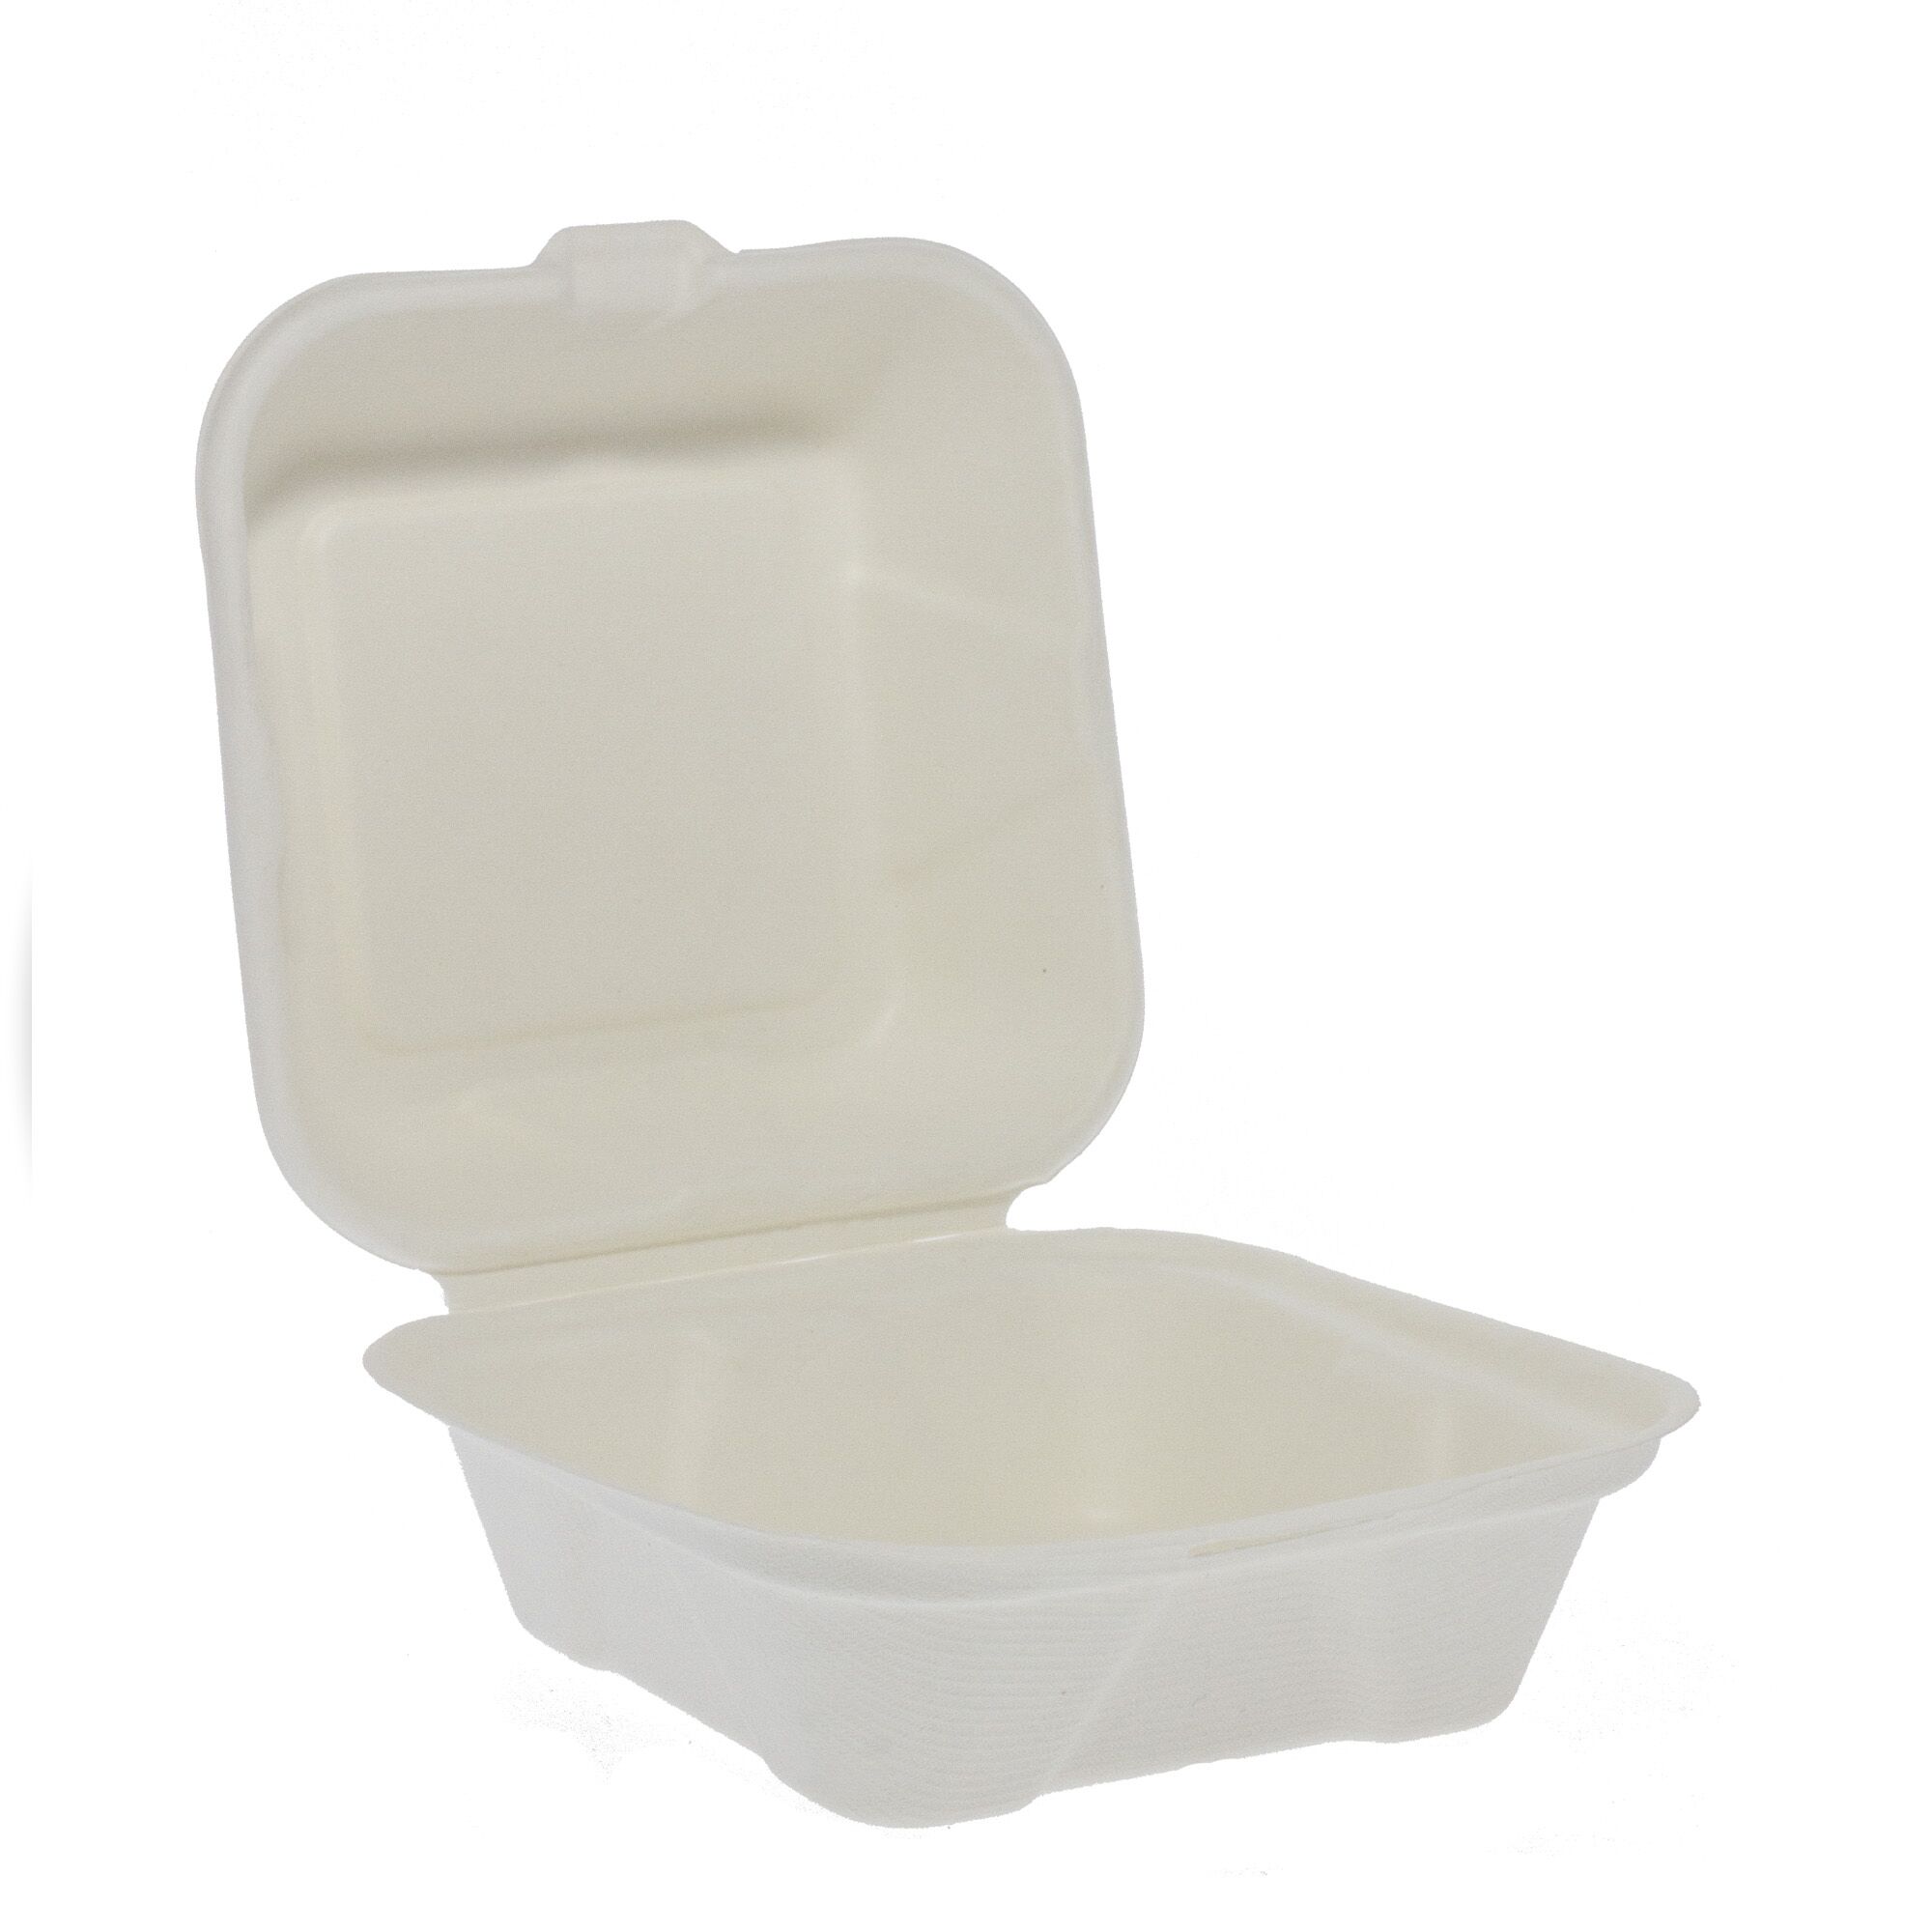 Suppliers Of Bagasse Sugarcane 6" Burger Per Box 400 For The Foods Industry